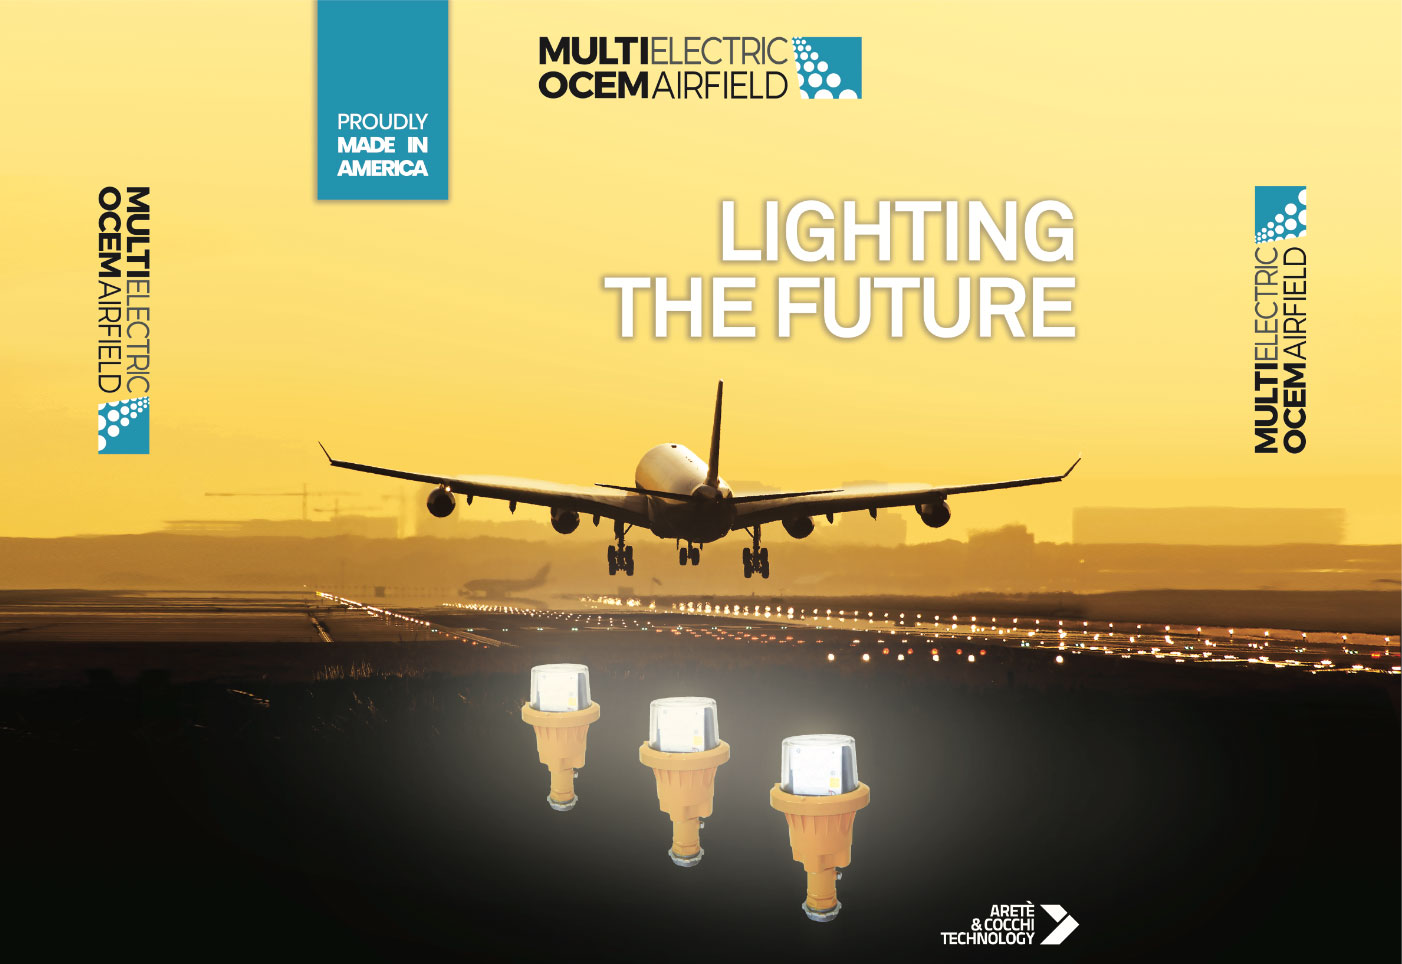 June 16 – 19, MULTI ELECTRIC- OCEM AIRFIELD showcases at the 91st Annual AAAE Conference & Exposition